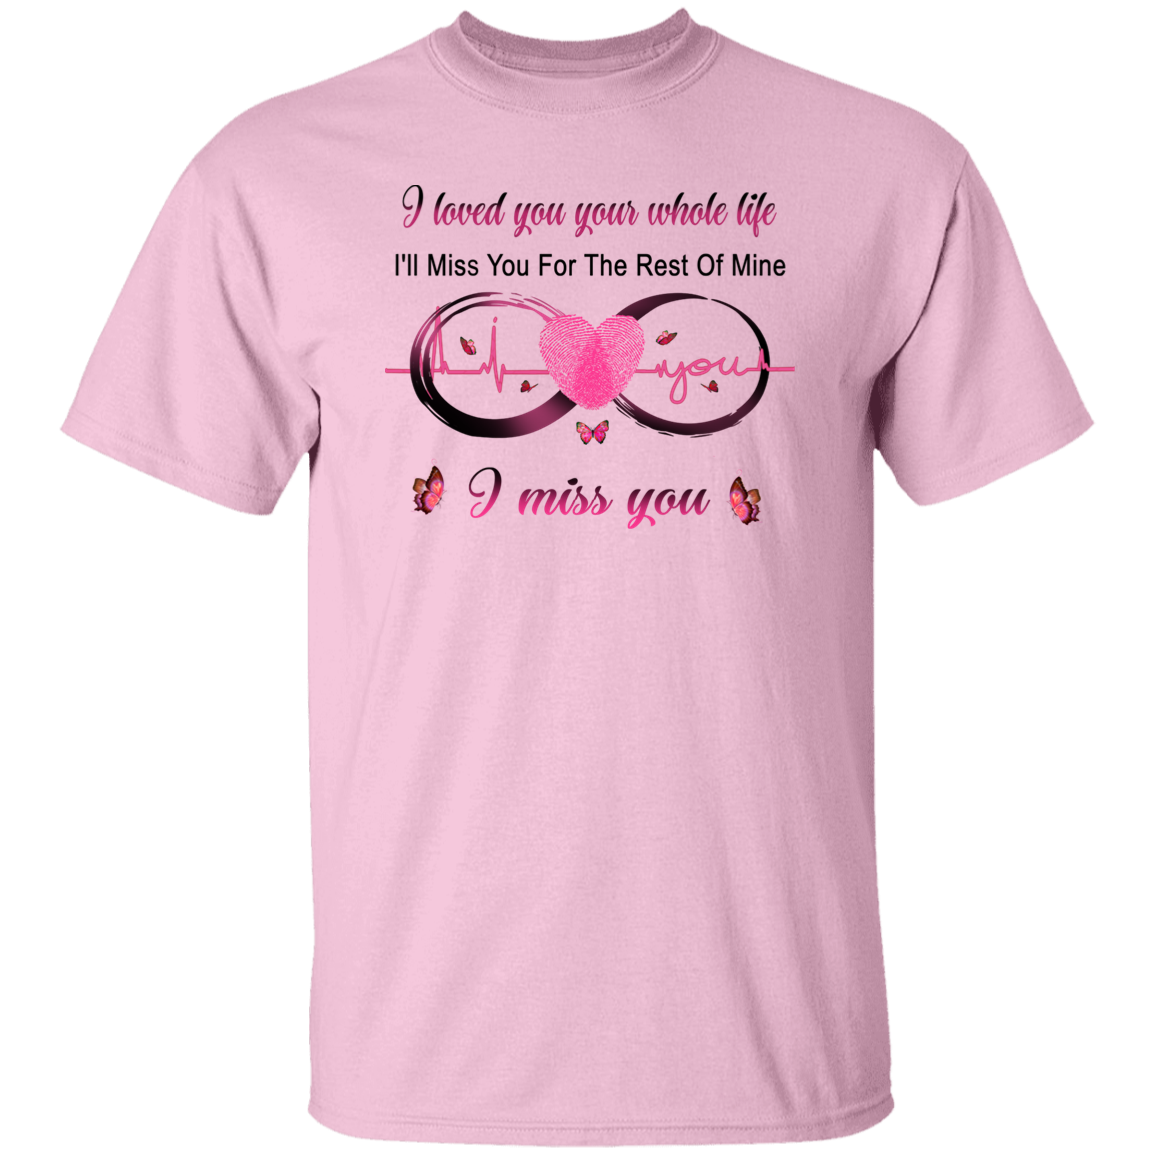 I Loved You Your Whole Life Memorial T-Shirt